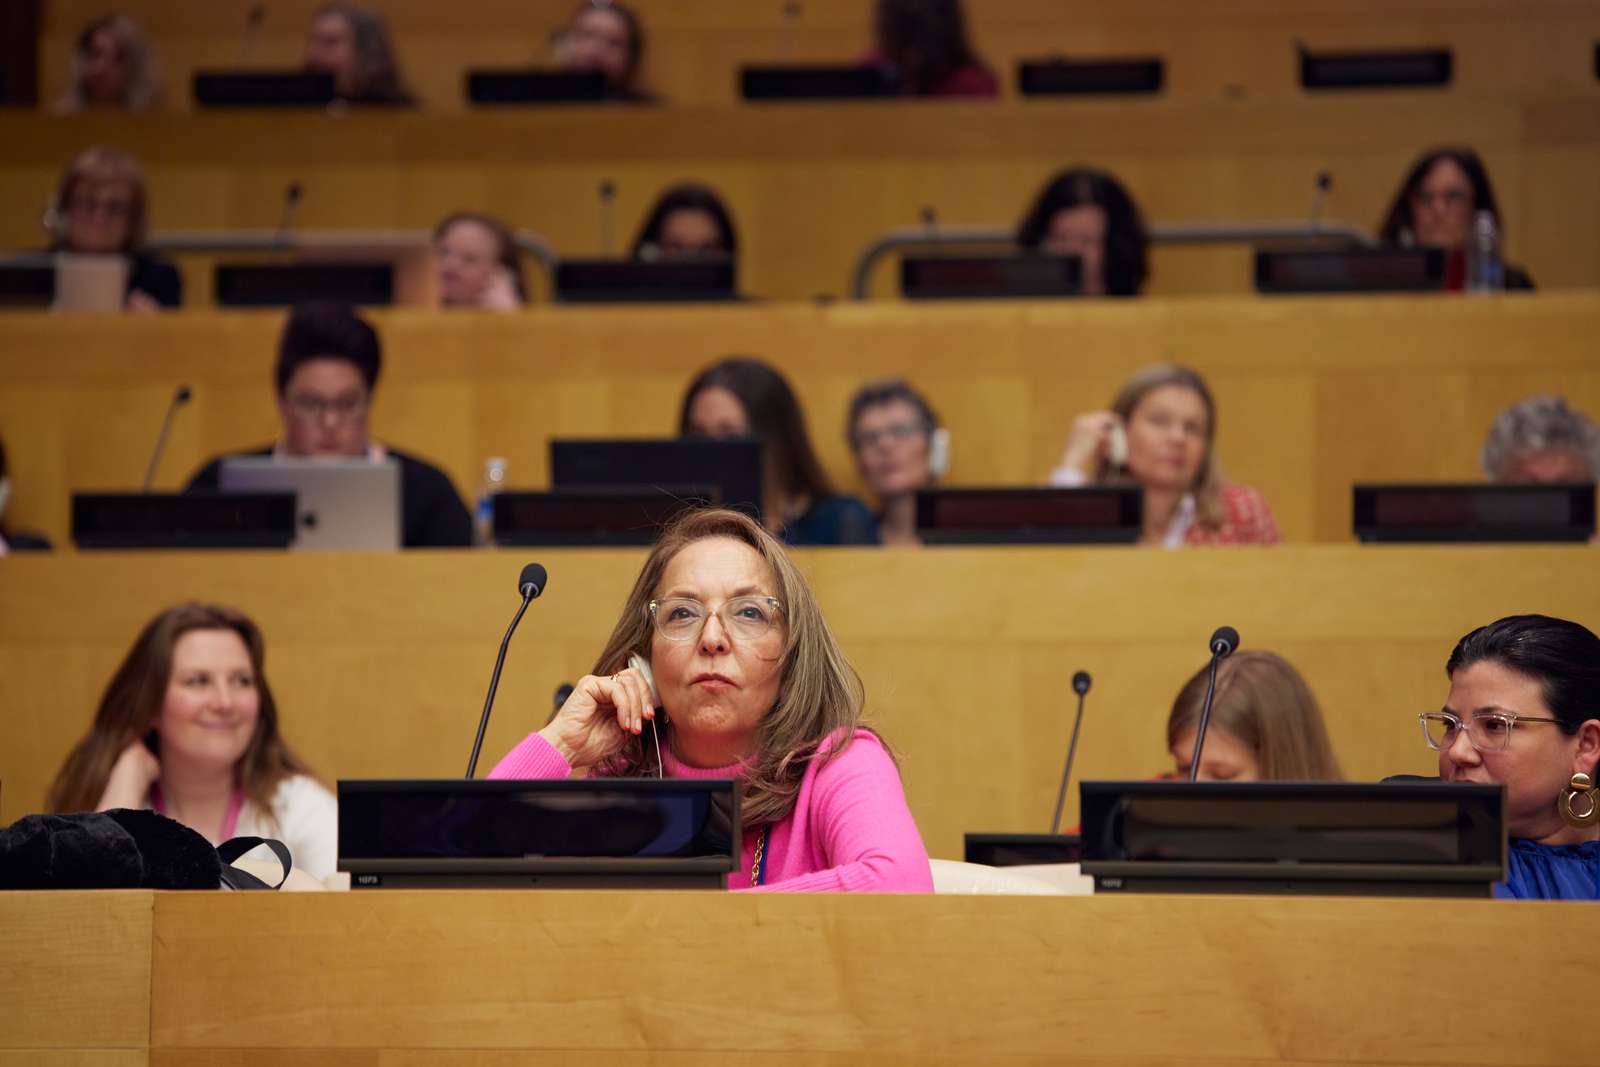 Pushing back the push-back - Nordic solutions to online gender-based violence